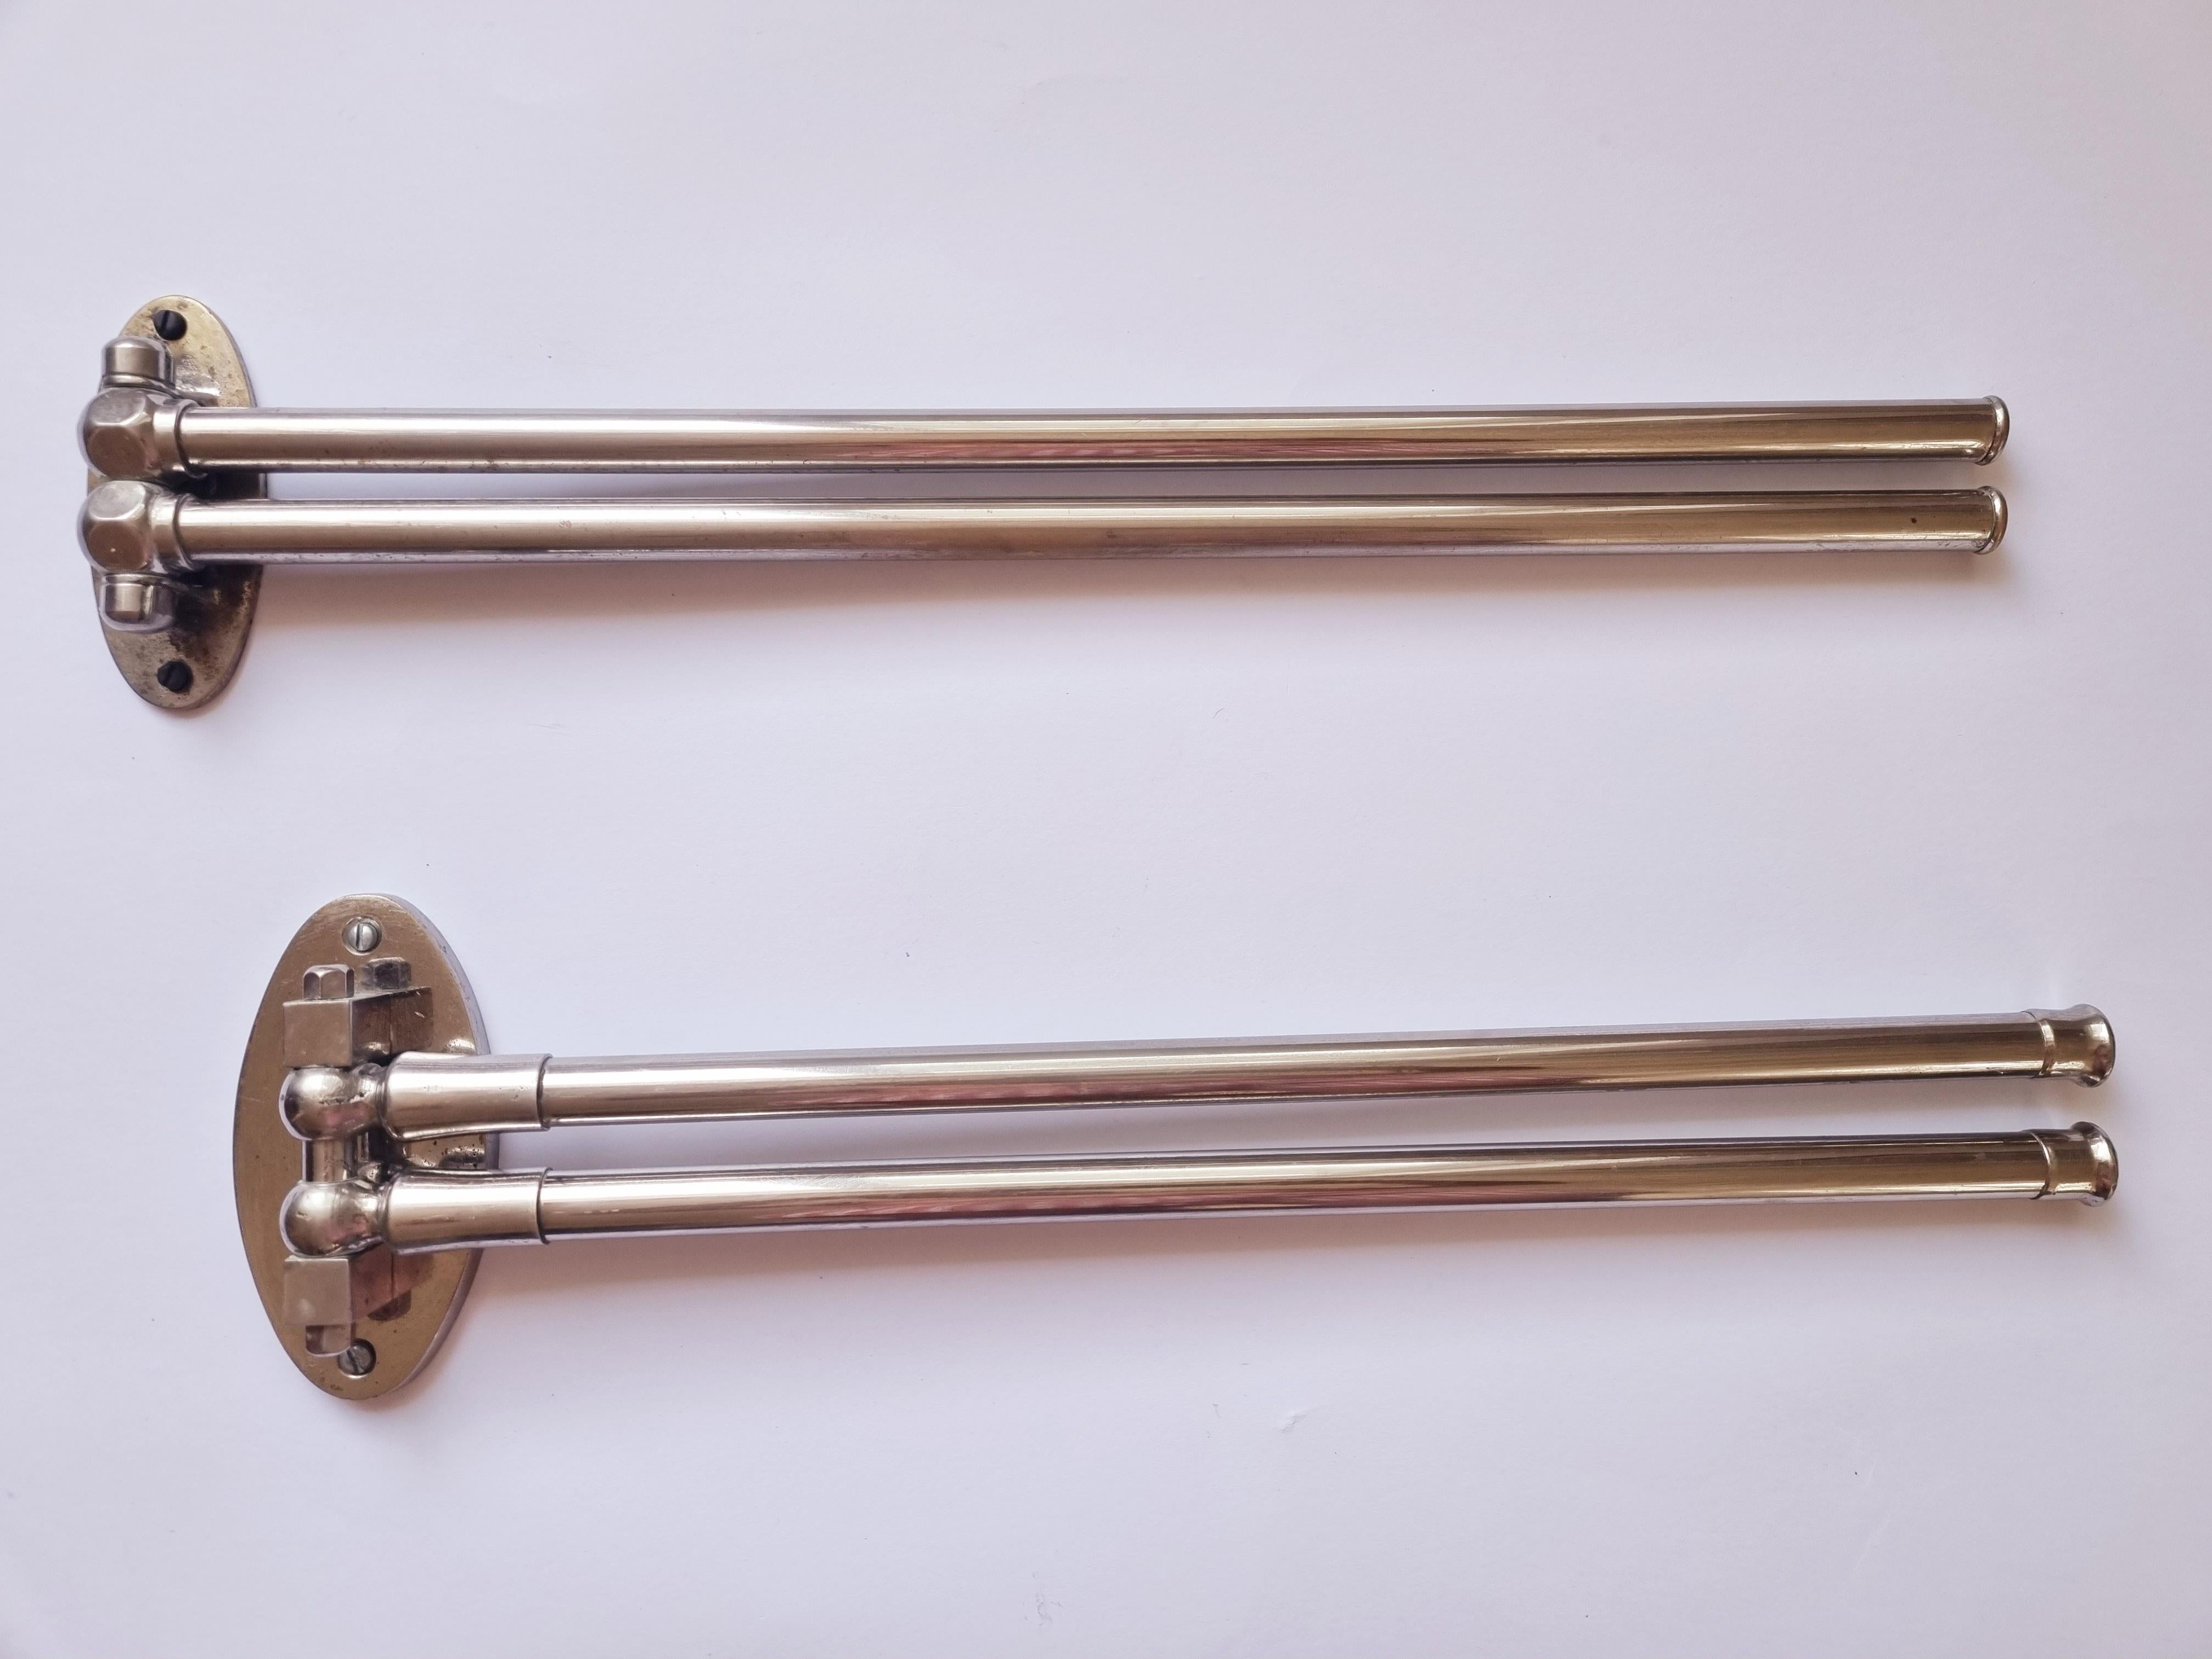 Austrian Set of Two Functionalism, Art Deco Chrome Towel Holders, 1930s For Sale